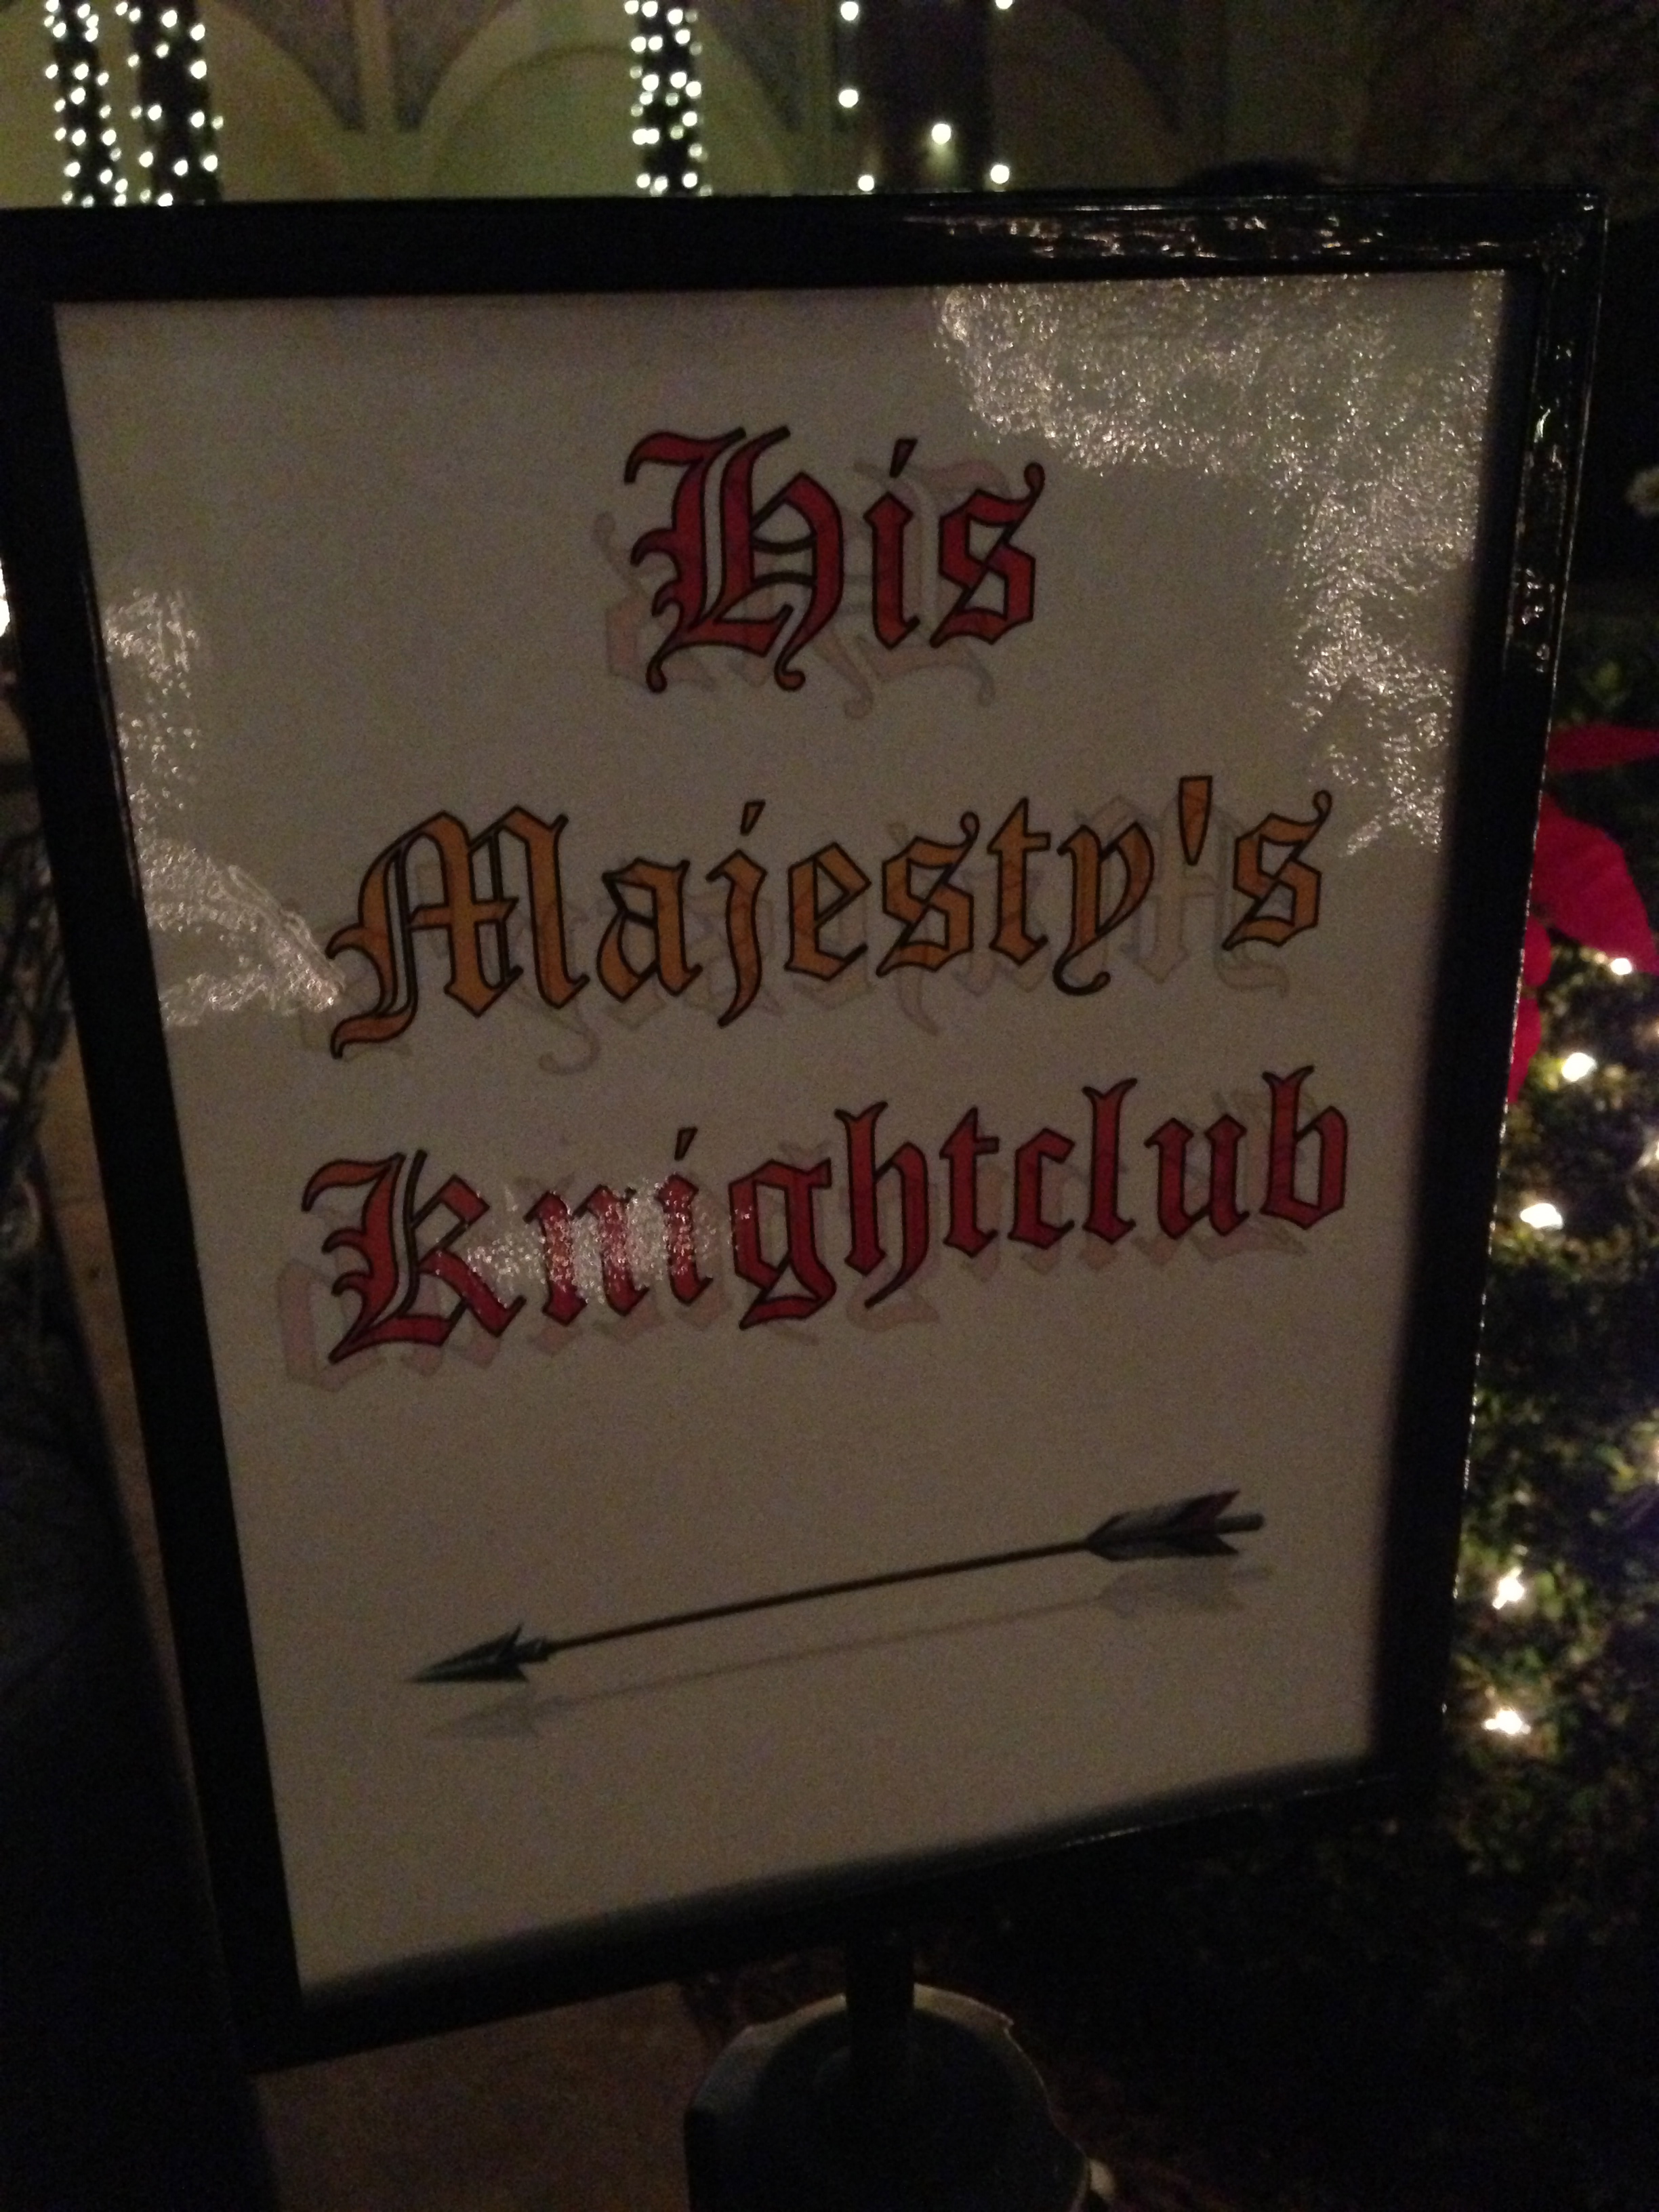  My favorite sign. MT has some weird stuff going on, including a "Knightclub" where the knights take the dance floor after the show. More on that later.. 